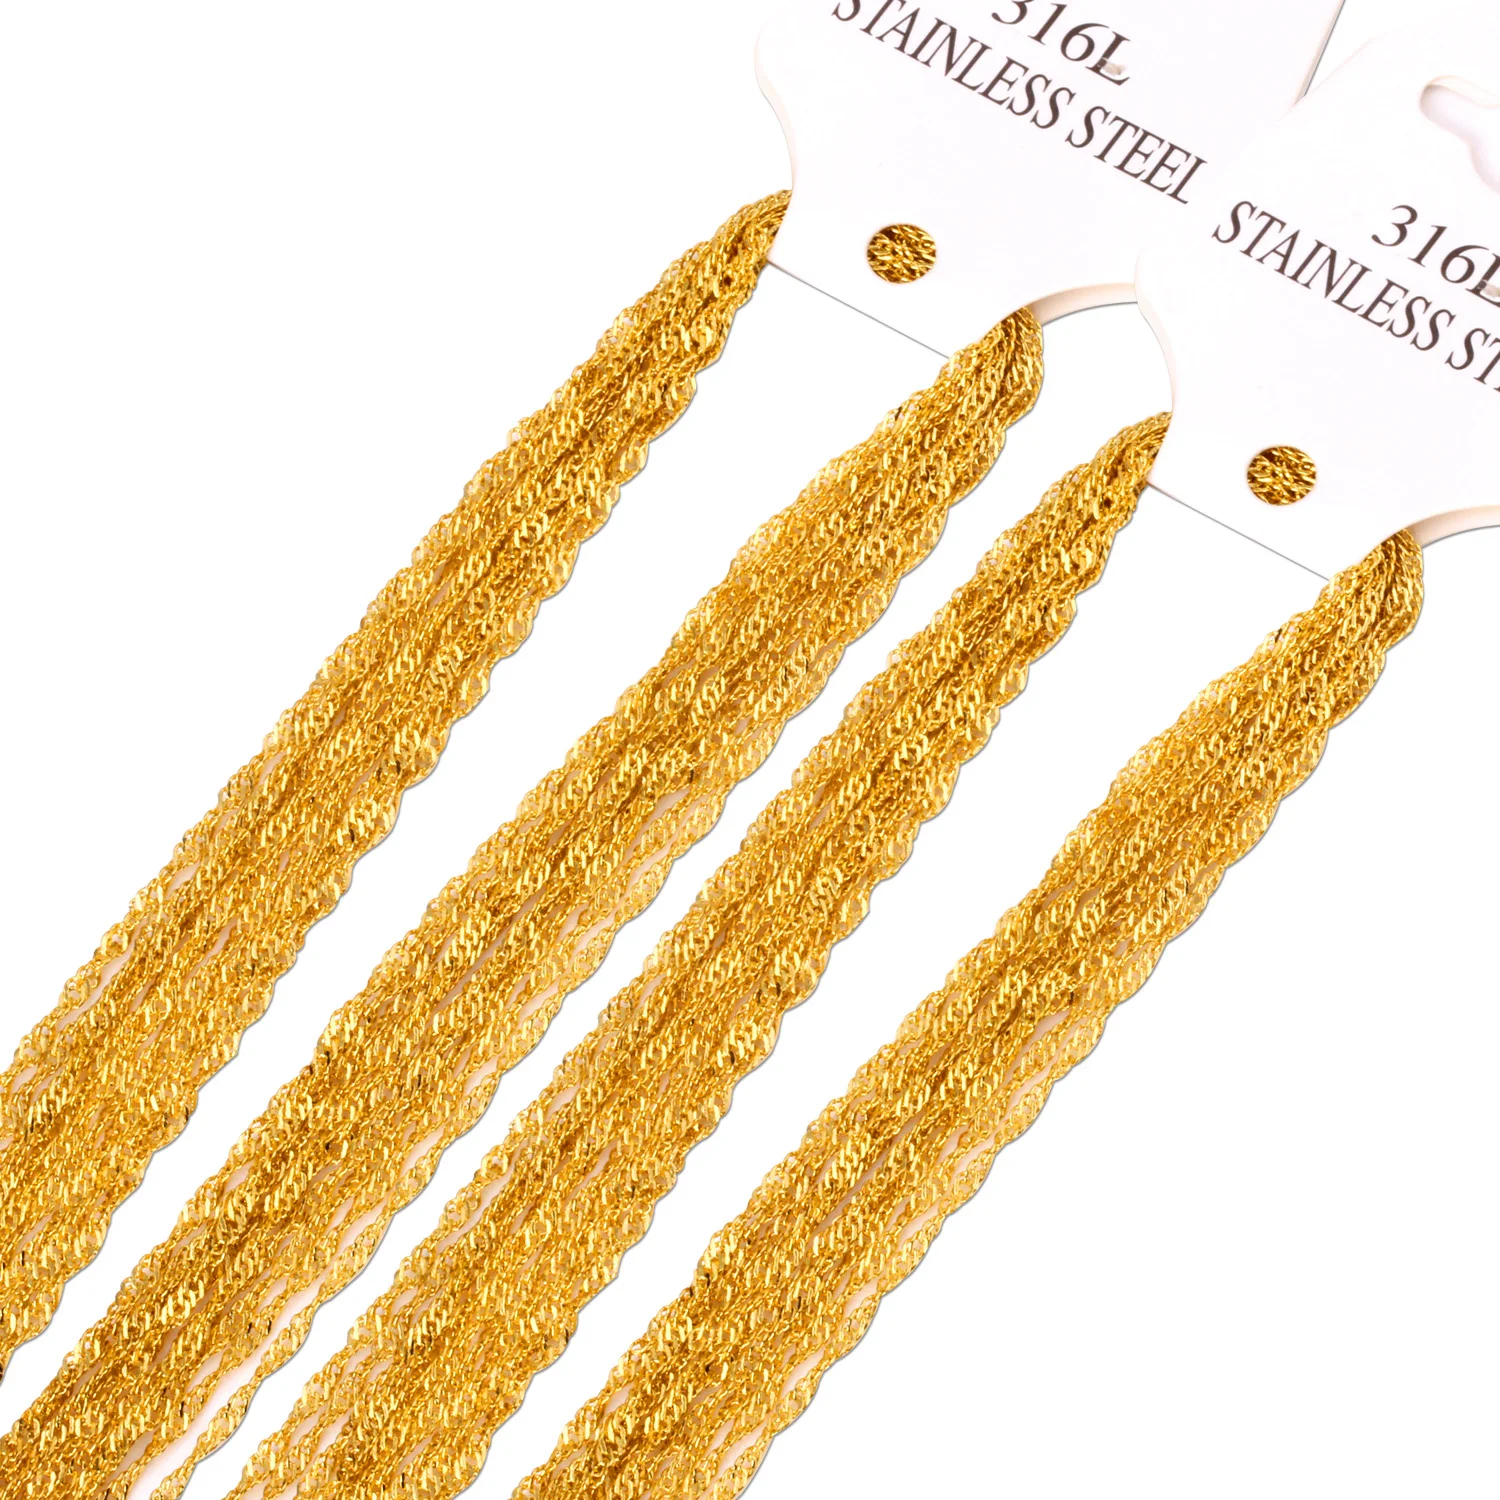 

Promotion Sale wholesale 10pcs/lot Gold Silver Color 2mm Link Necklace Chains 18"20" 22"24inch Fashion Jewelry Flat Chains